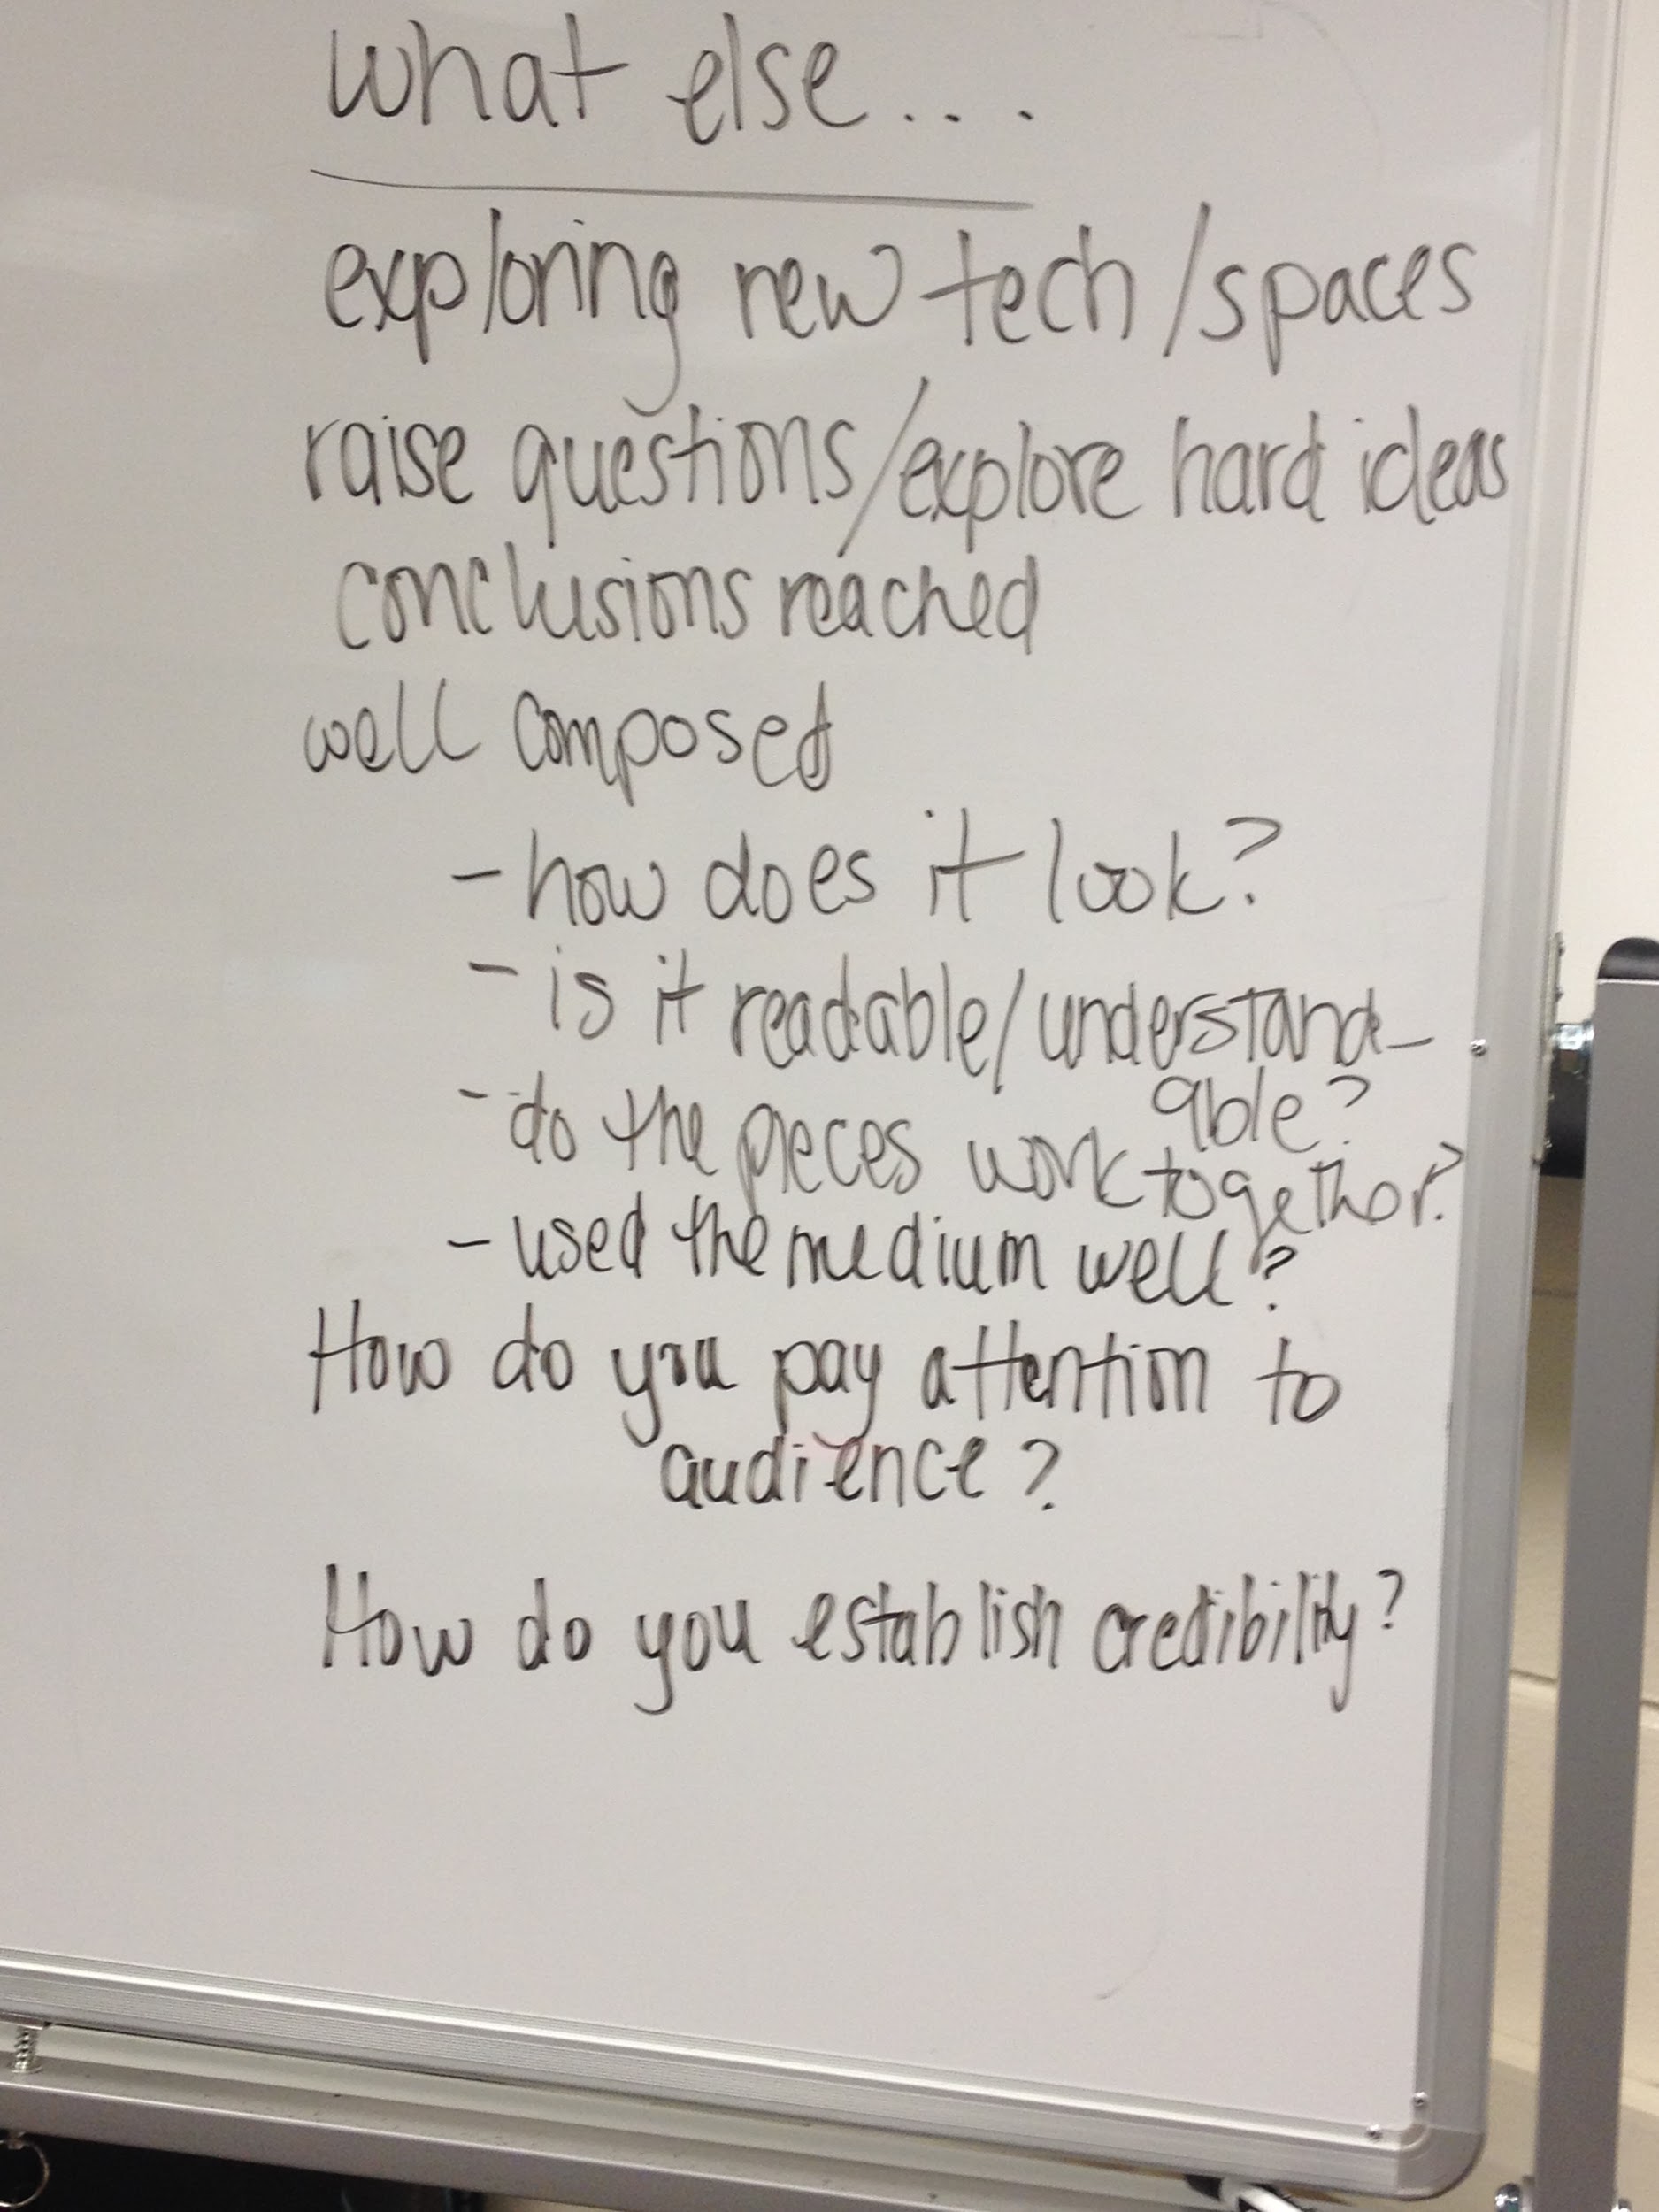 A photograph of a whiteboard with notes and questions about how to evaluate the technical communication project.